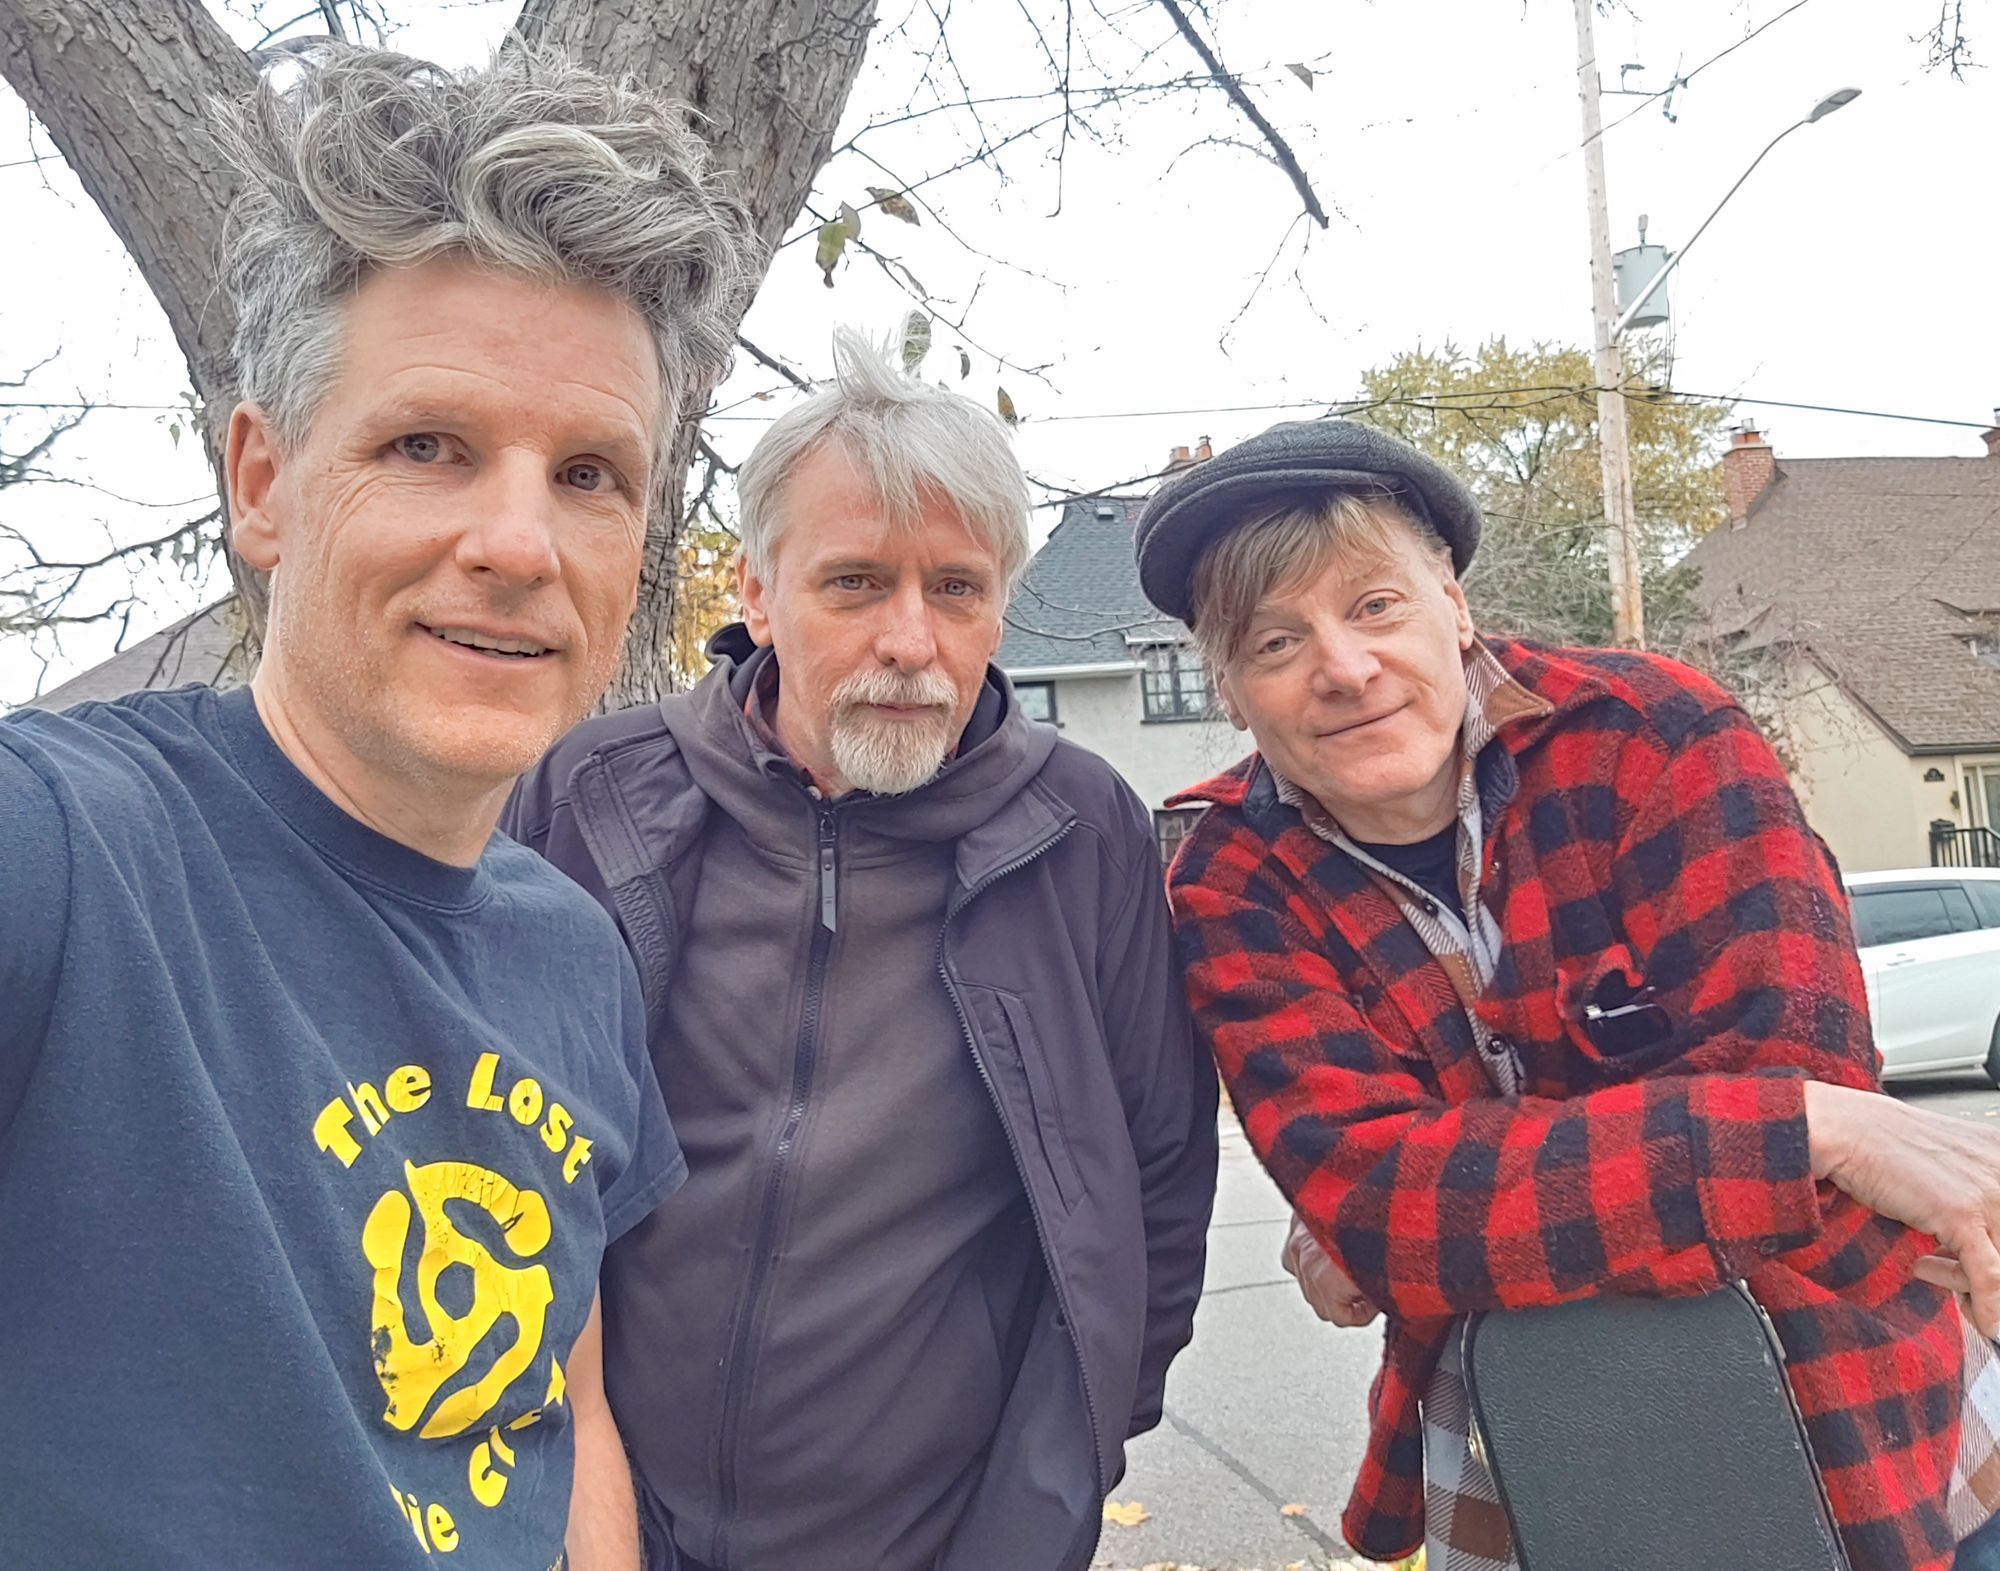 Ron Hawkins and Lawrence Nichols from Lowest of the Low: Toronto Mike'd Podcast Episode 1361